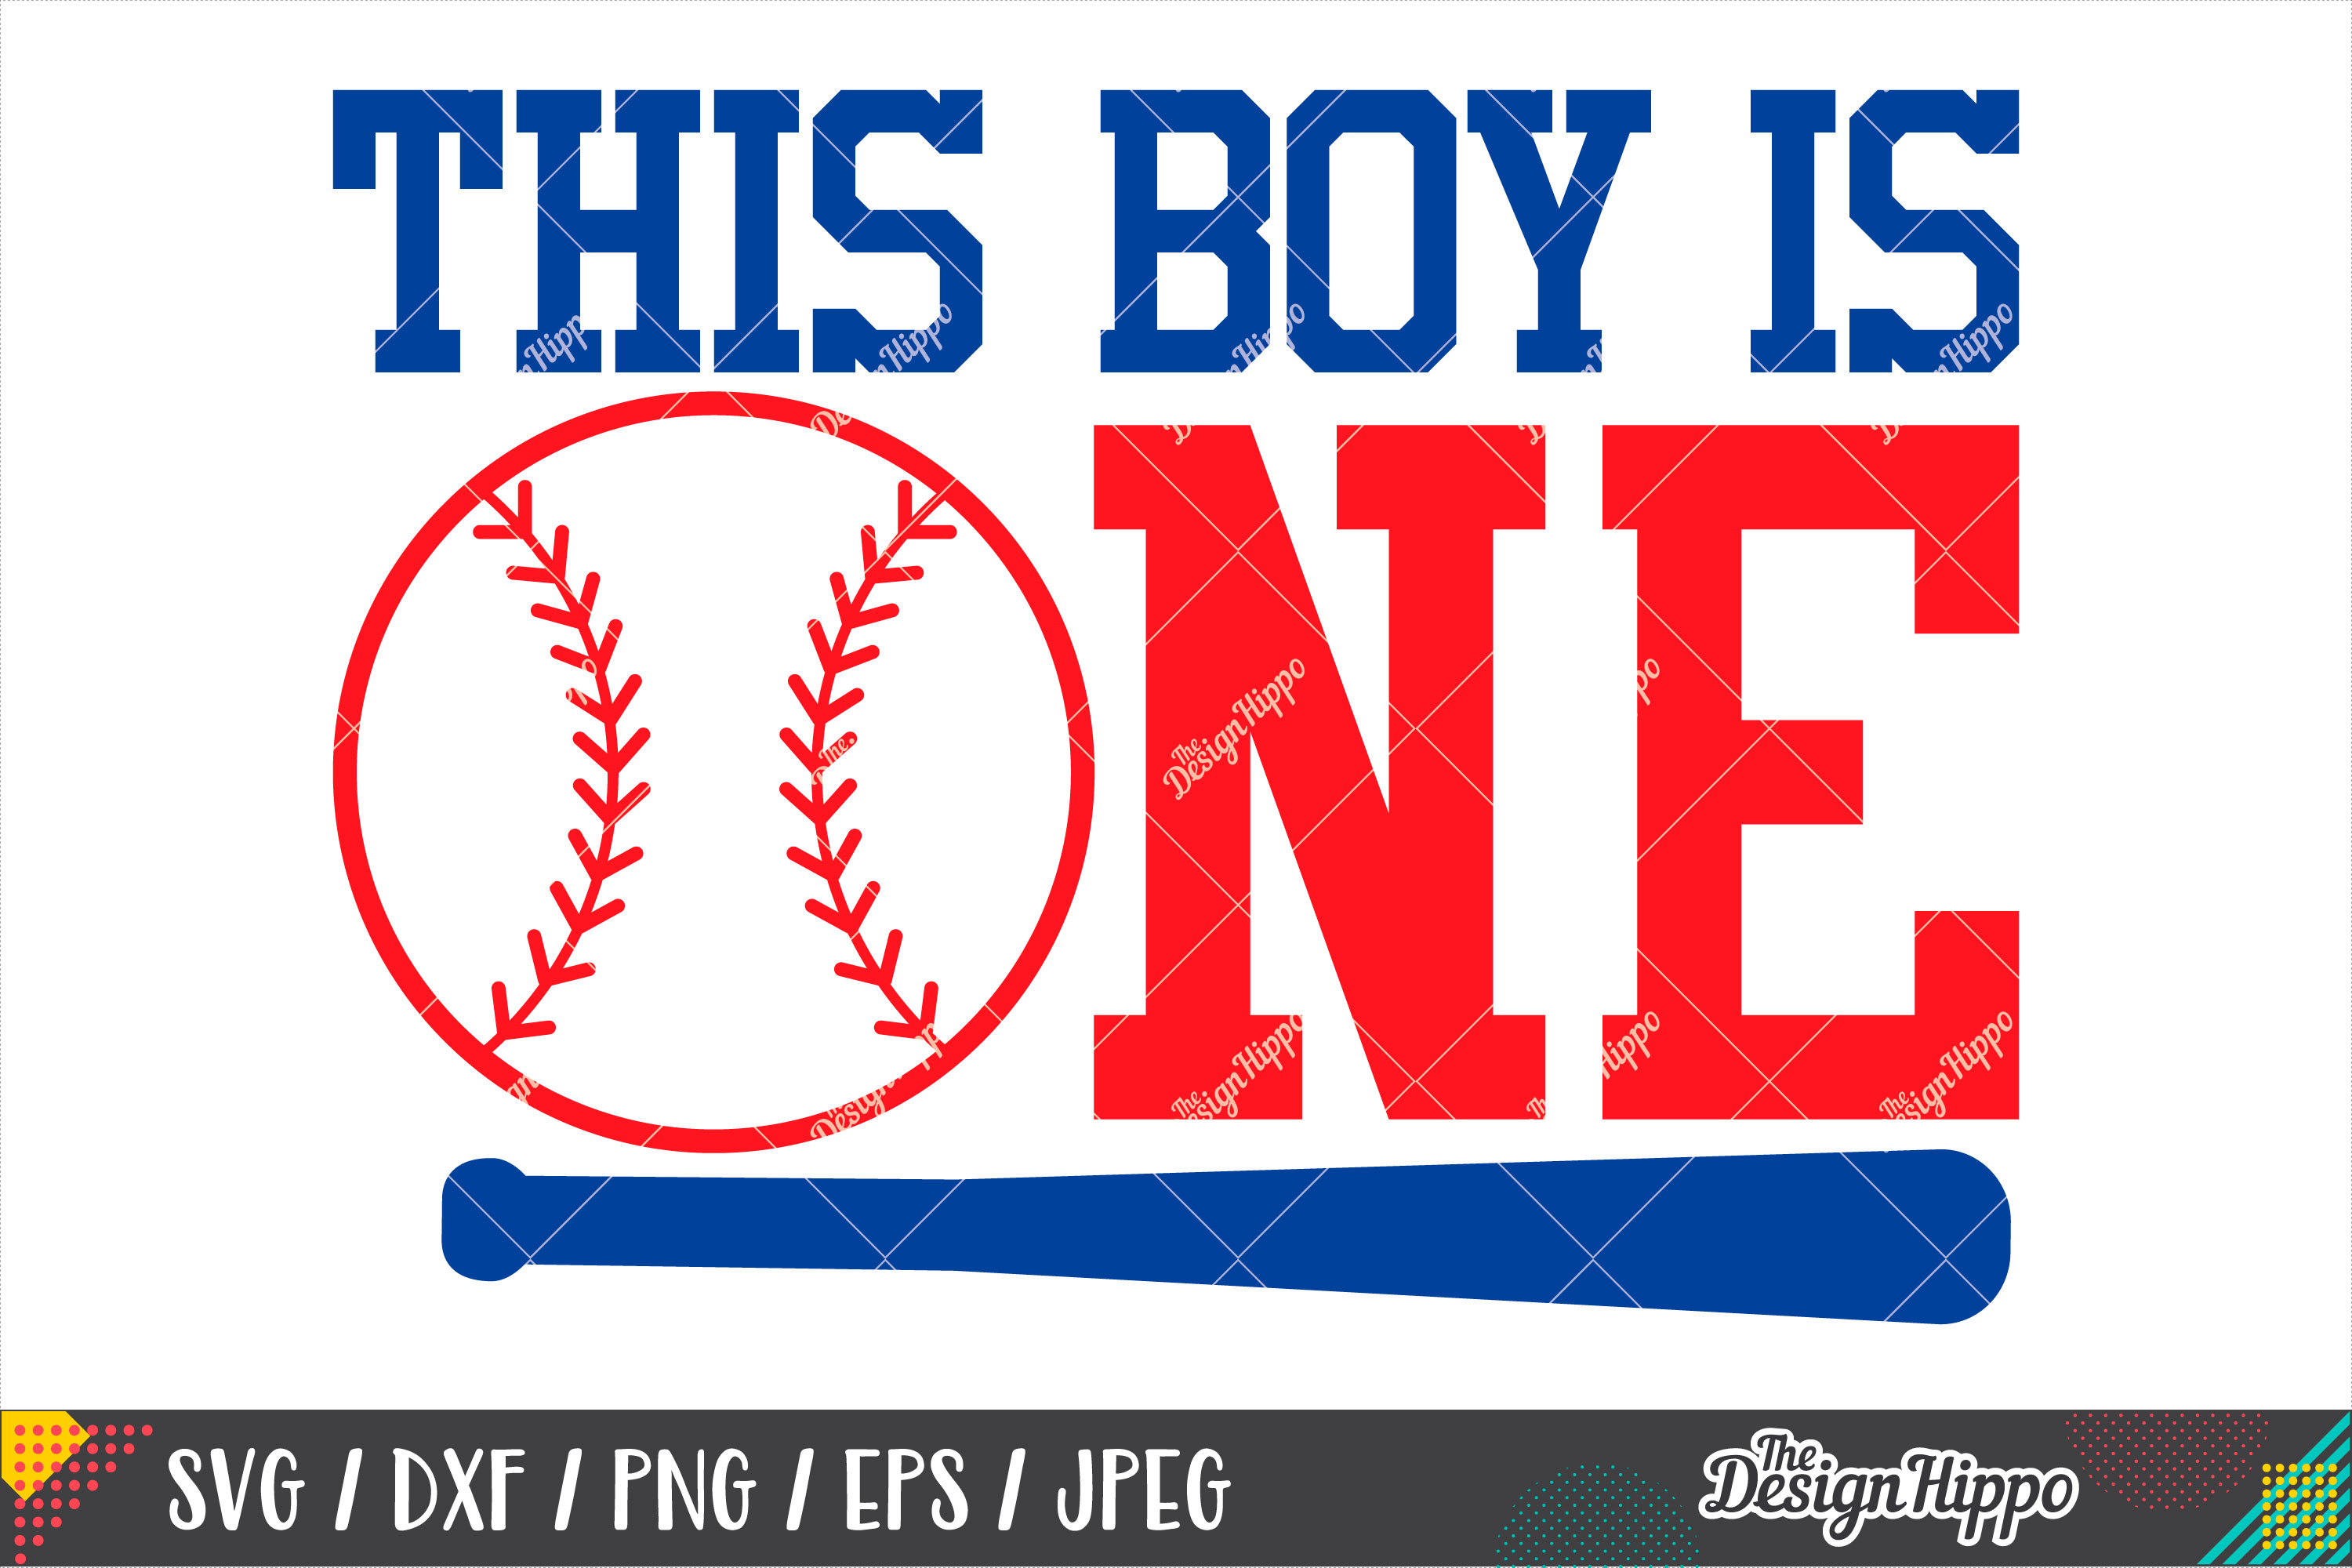 Download This Boy Is One SVG DXF PNG Cut Files, Baseball Birthday SVG